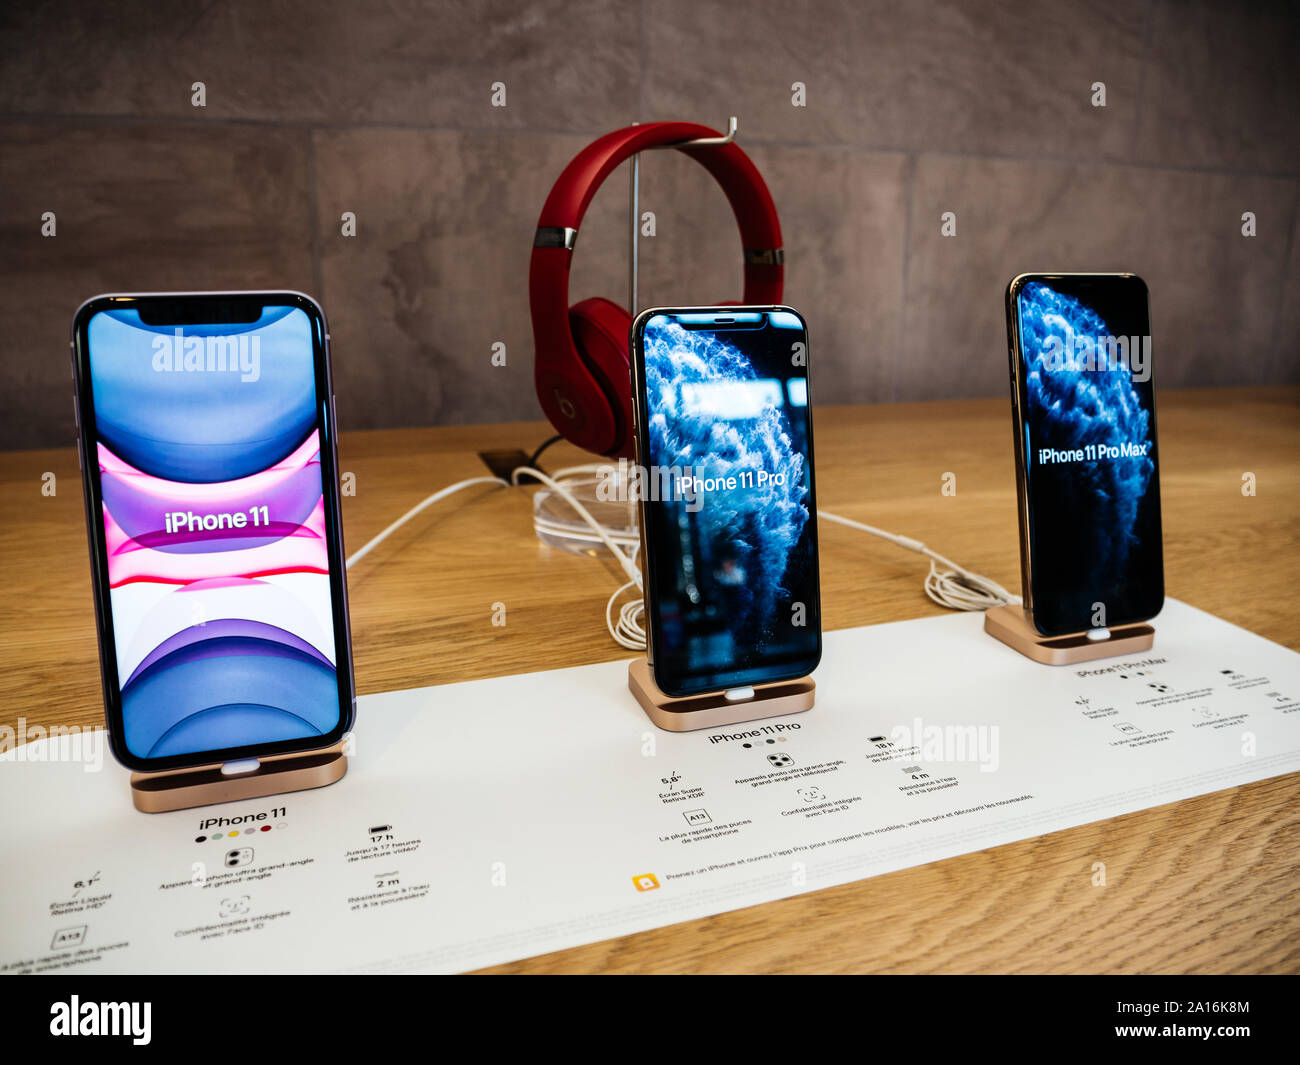 Paris, France - Sep 20, 2019: The new iPhone 11, 11 Pro and Pro Max range displayed in Apple Store next to Beats by Dr Dre Headphones as the smartphone by Apple Computers goes on sale Stock Photo